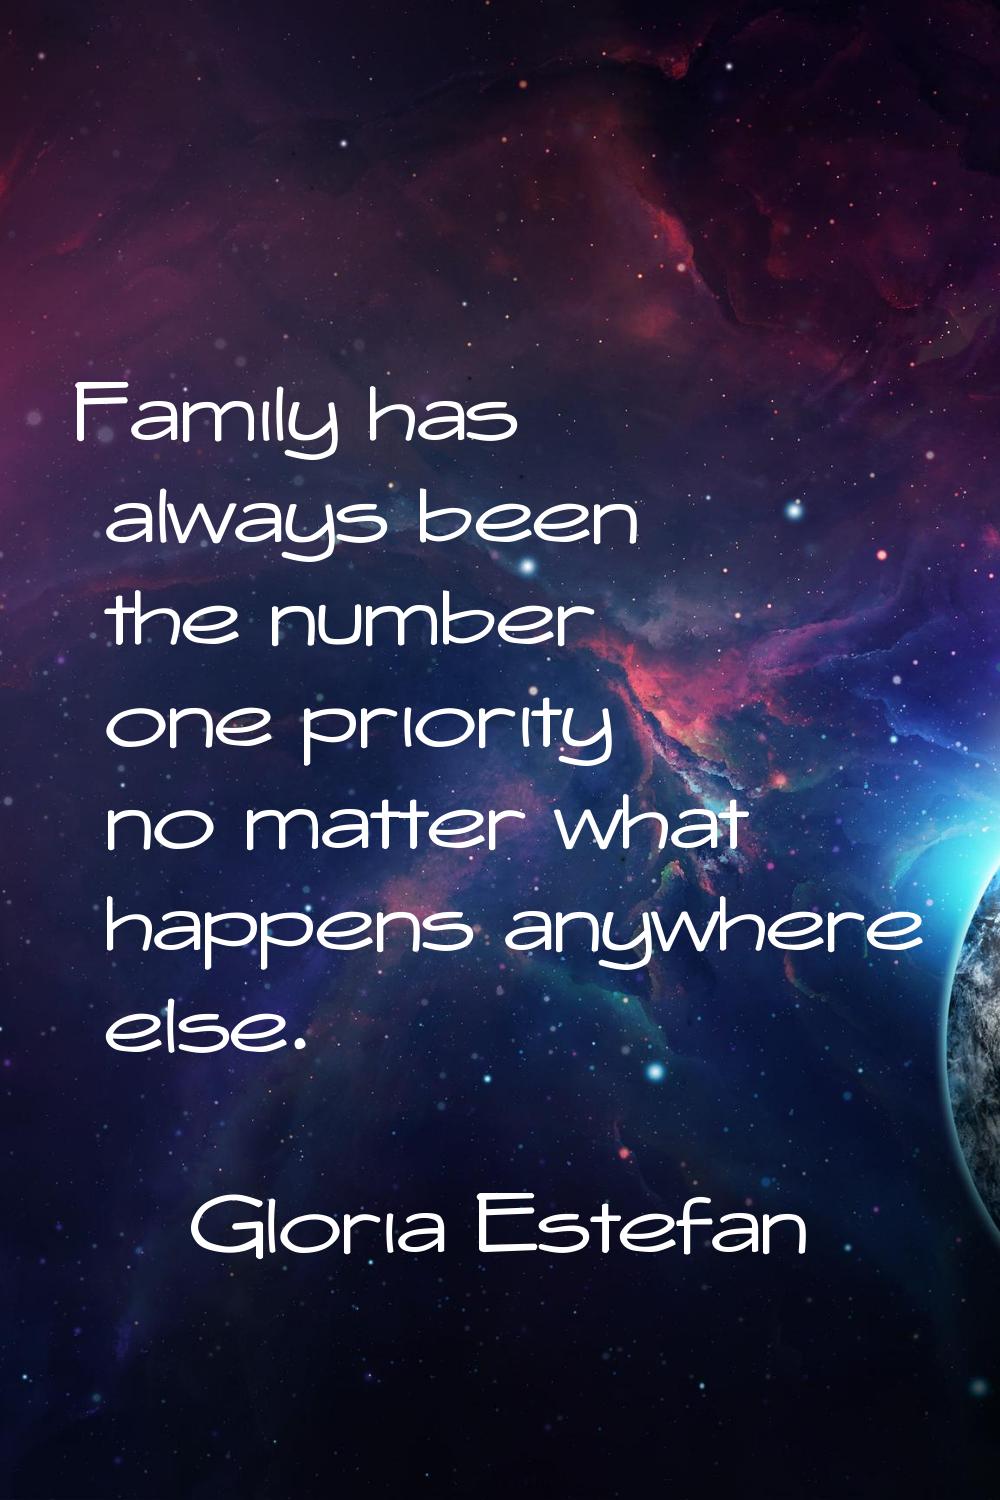 Family has always been the number one priority no matter what happens anywhere else.